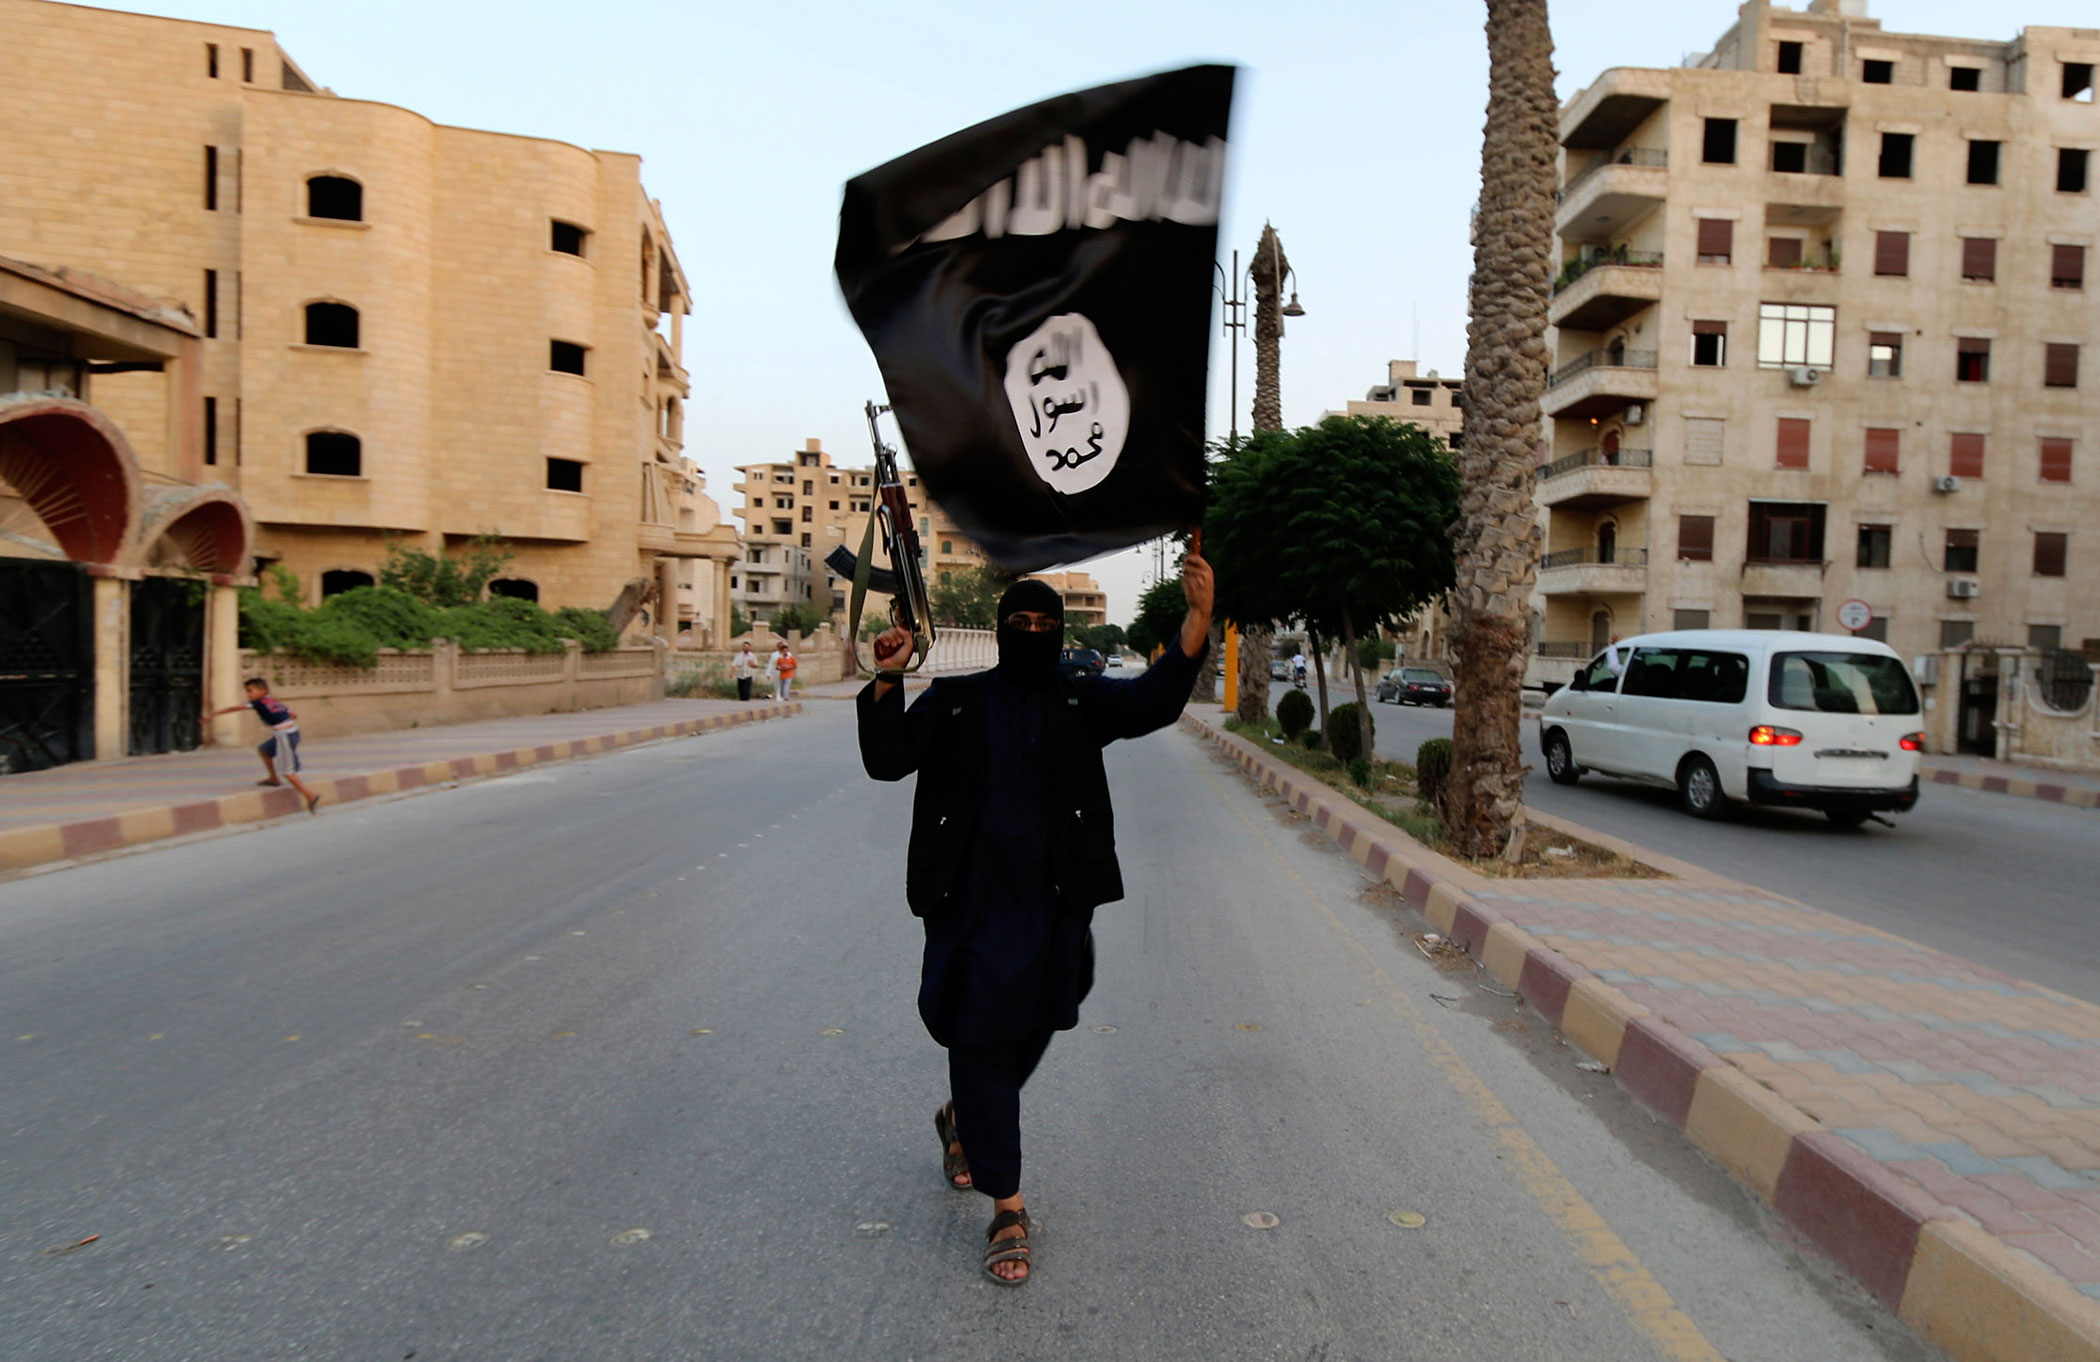 A member loyal to ISIS waves an ISIS flag in Raqqa, Syria, on June 29, 2014 (Reuters)